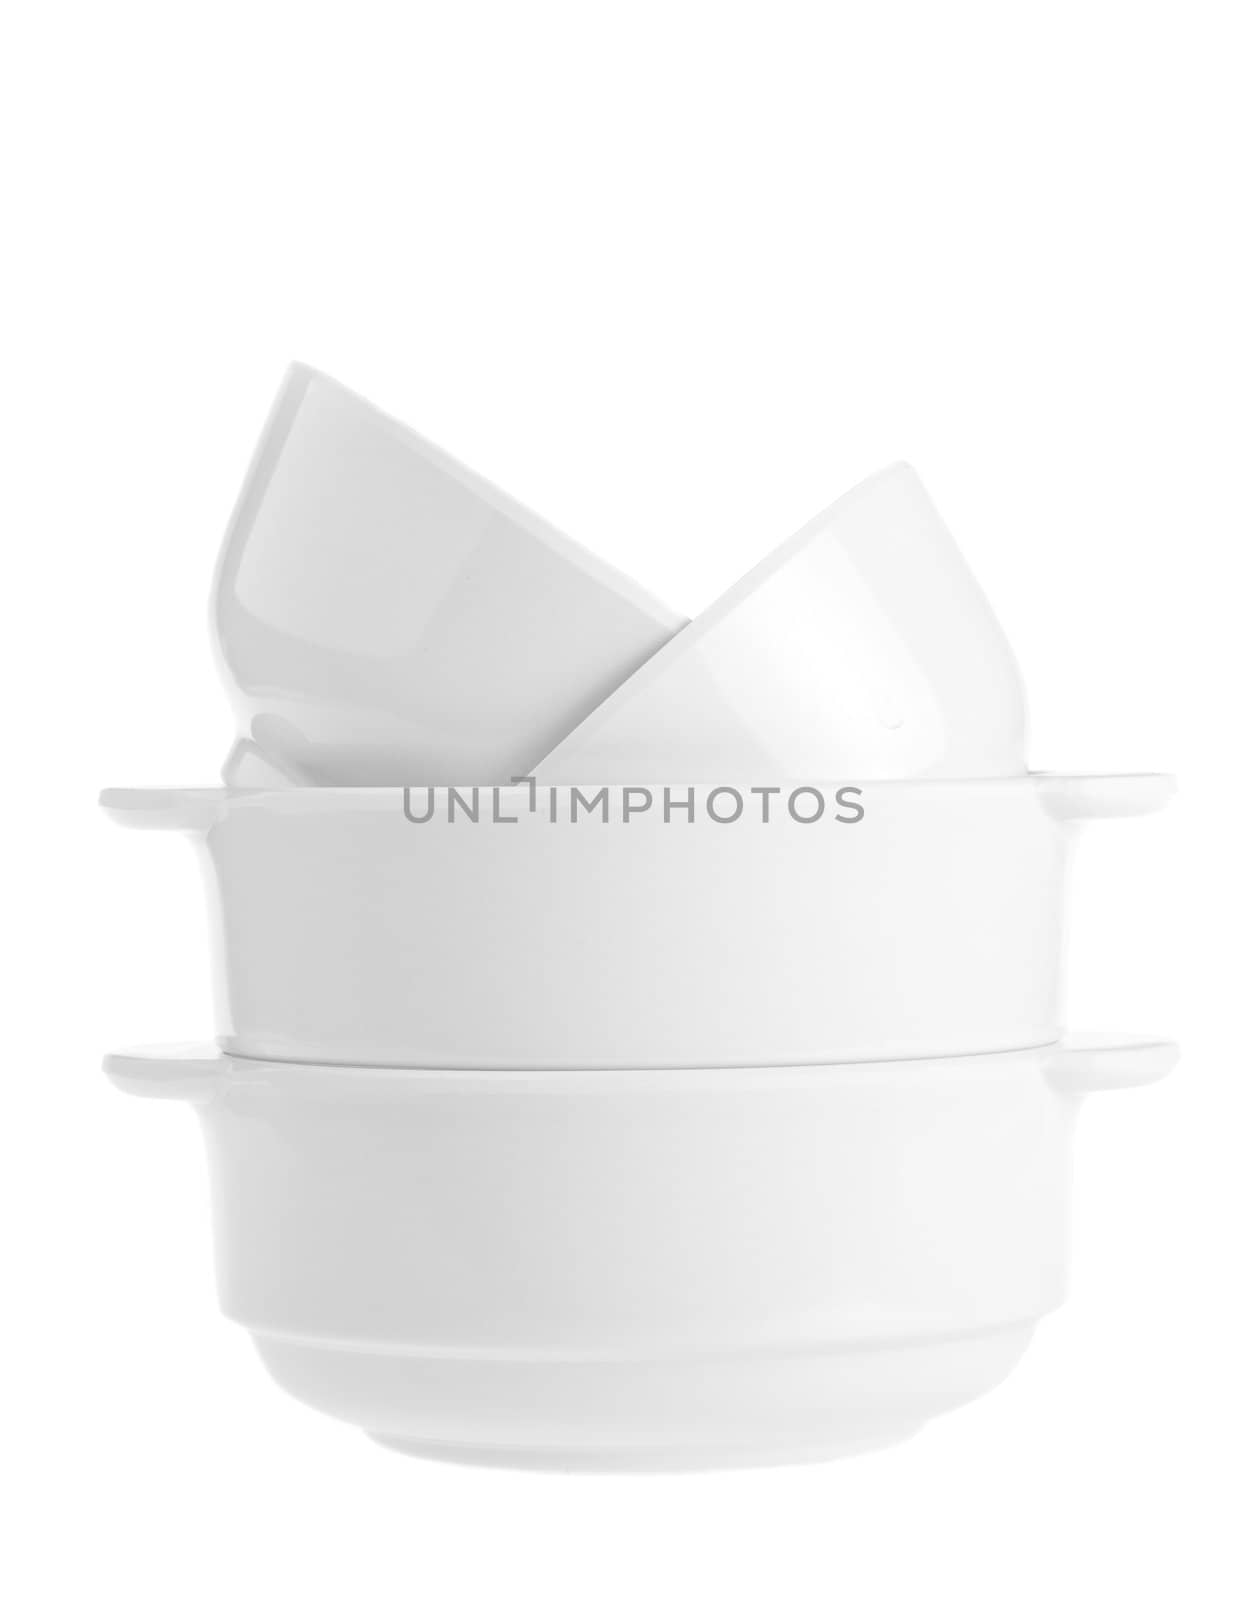 Stack of white bowls isolated on white background